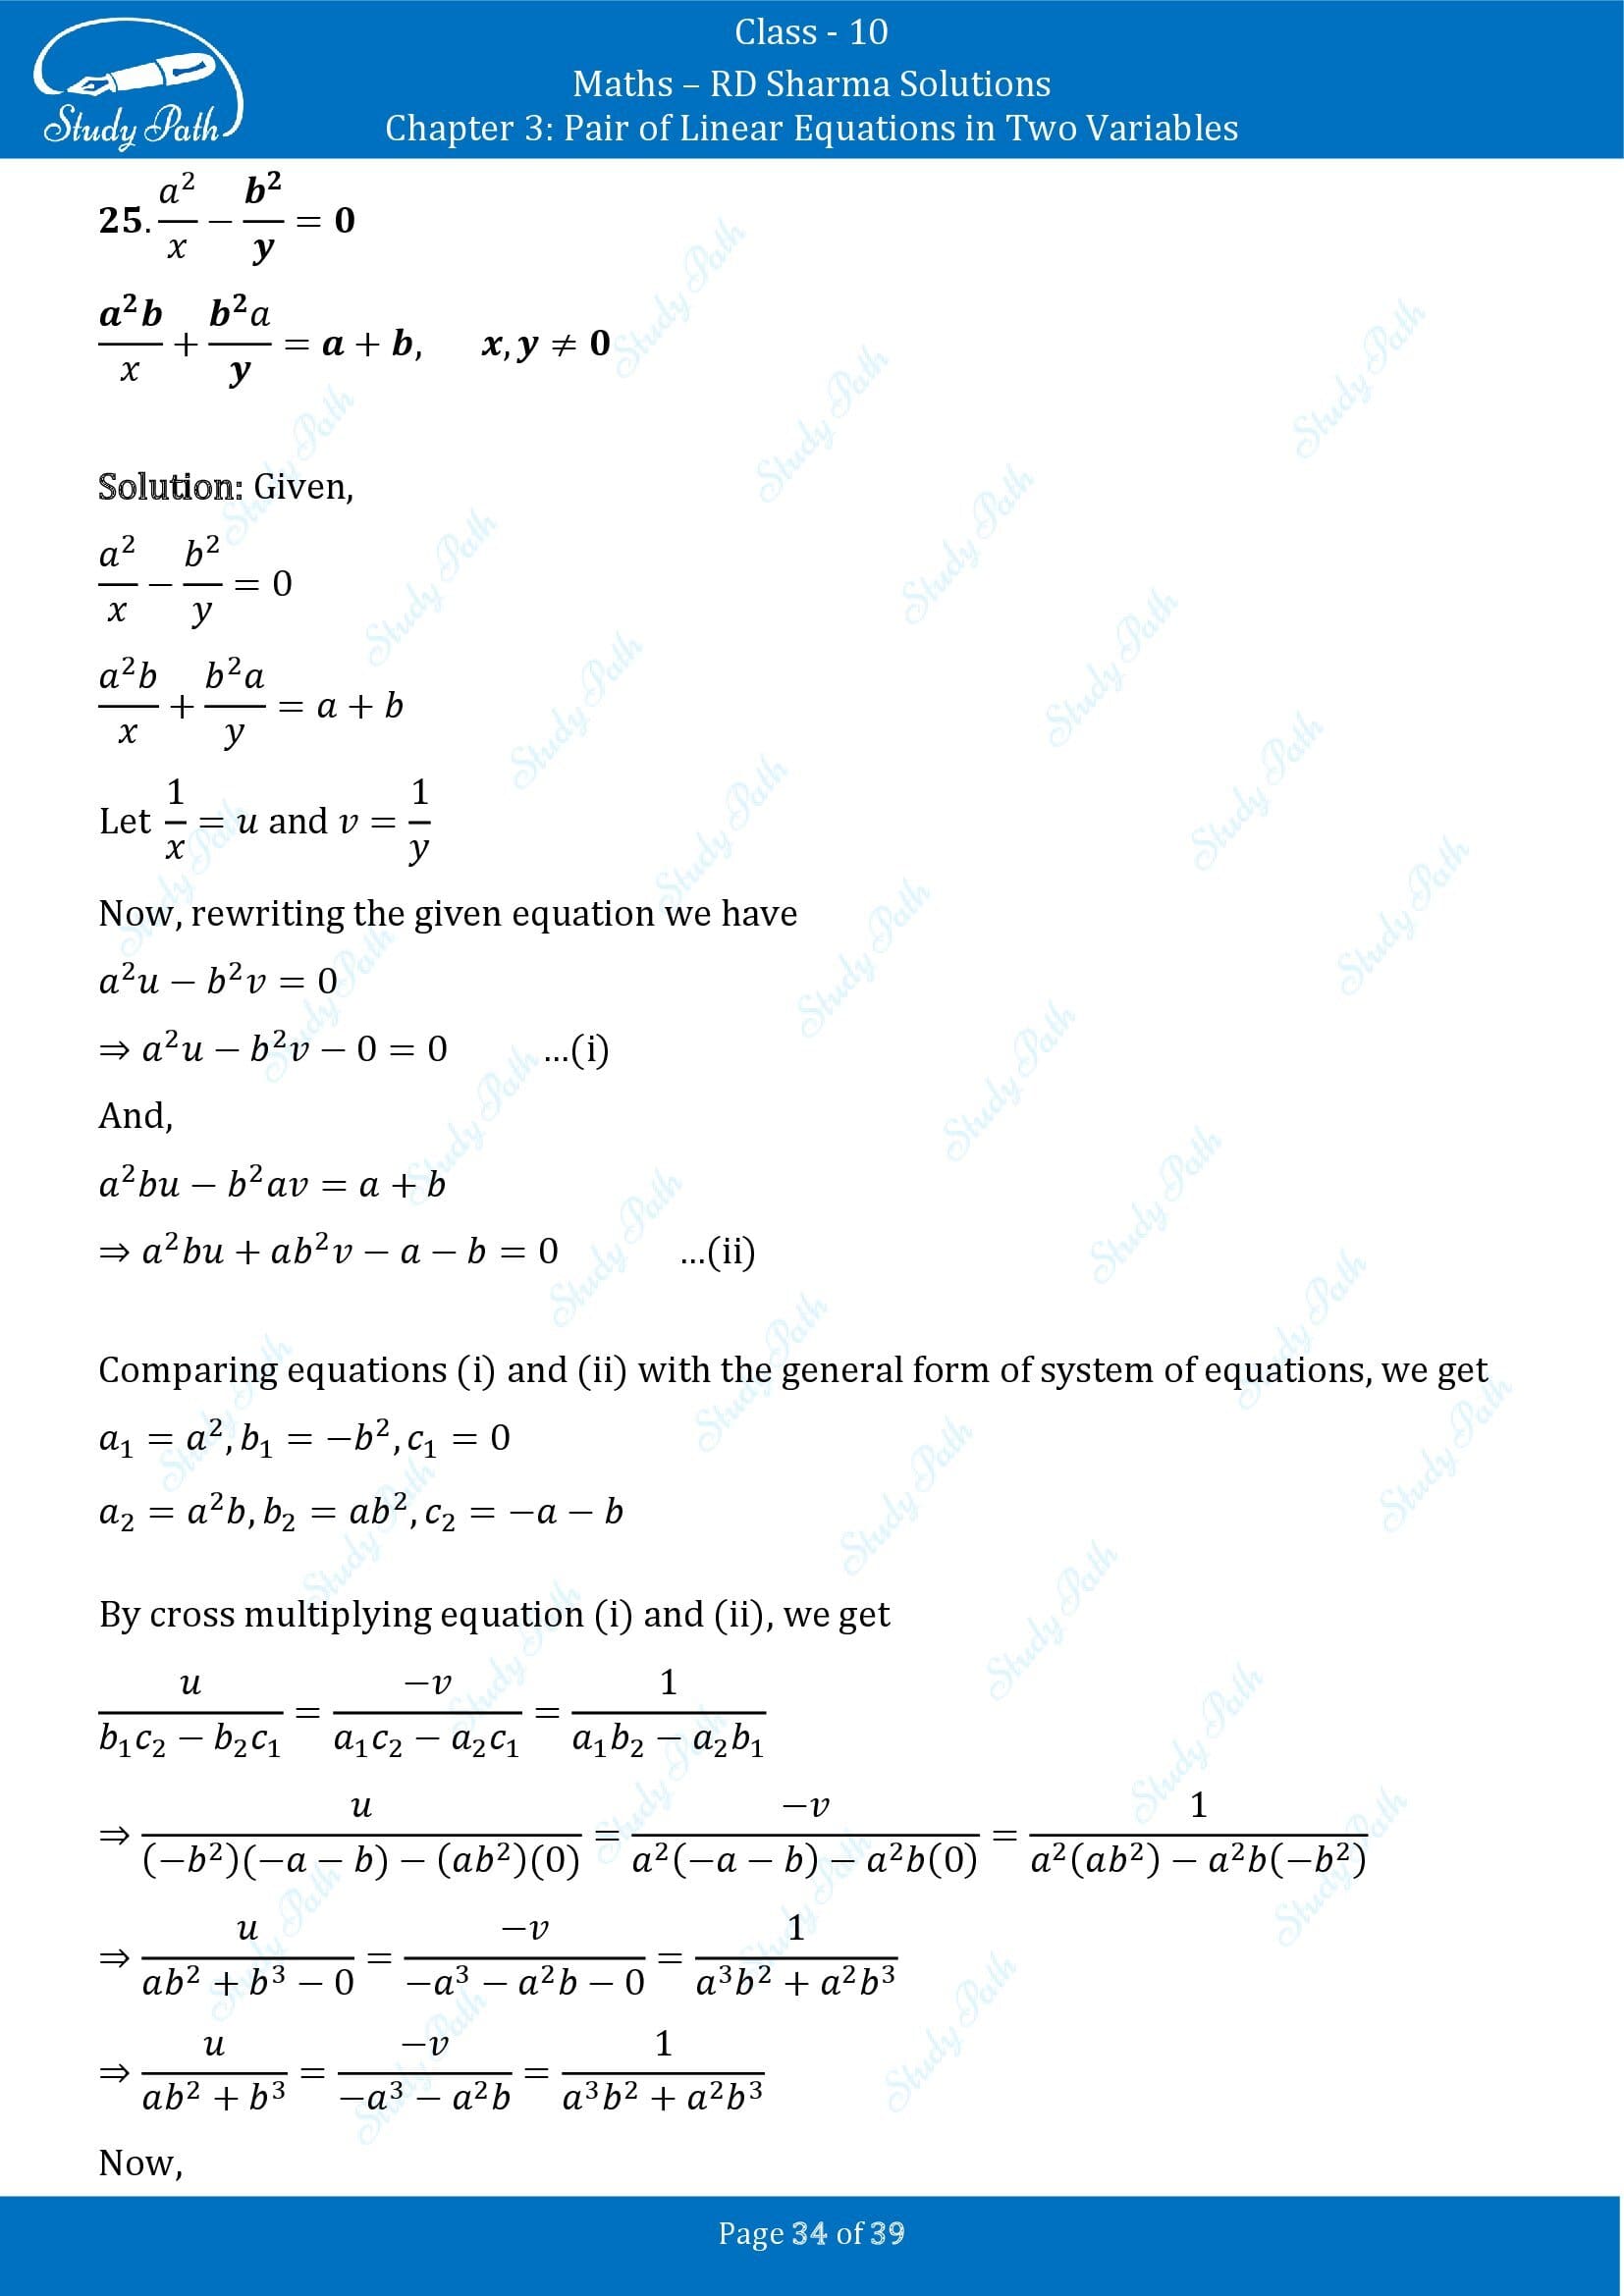 RD Sharma Solutions Class 10 Chapter 3 Pair of Linear Equations in Two Variables Exercise 3.4 00034